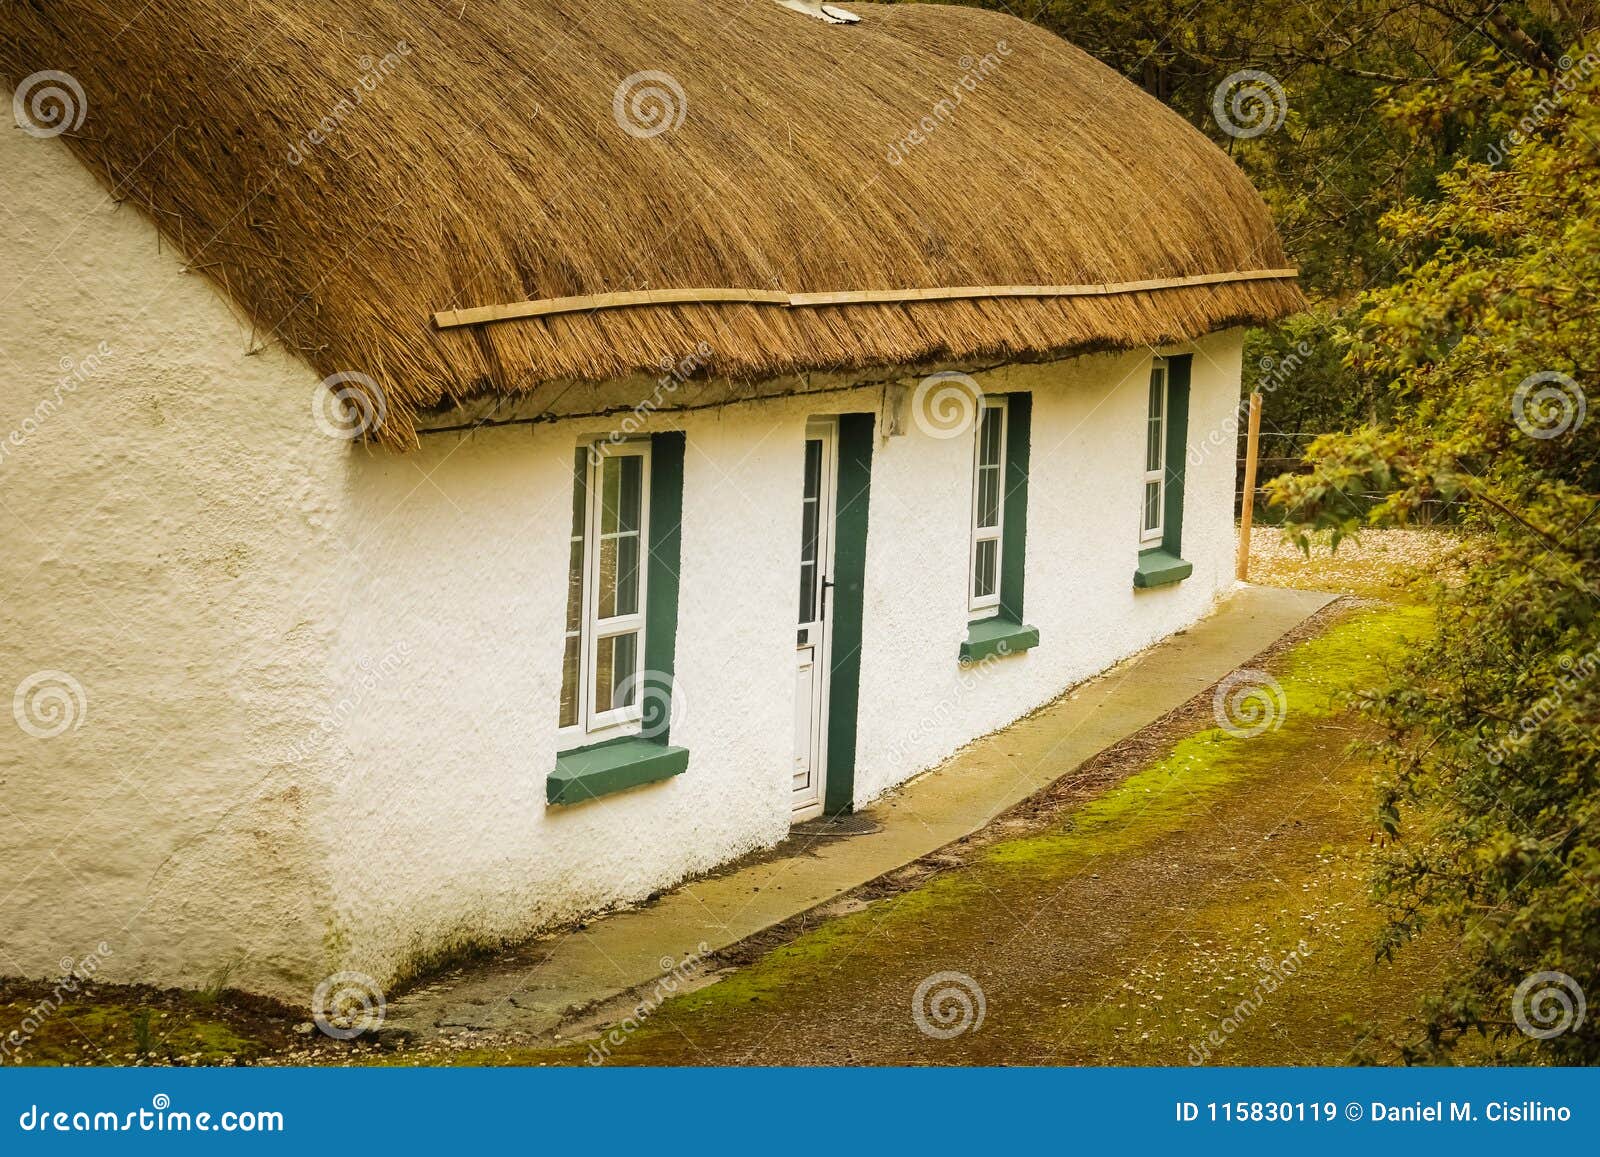 Traditional Thatched Cottage County Donegal Ireland Stock Image